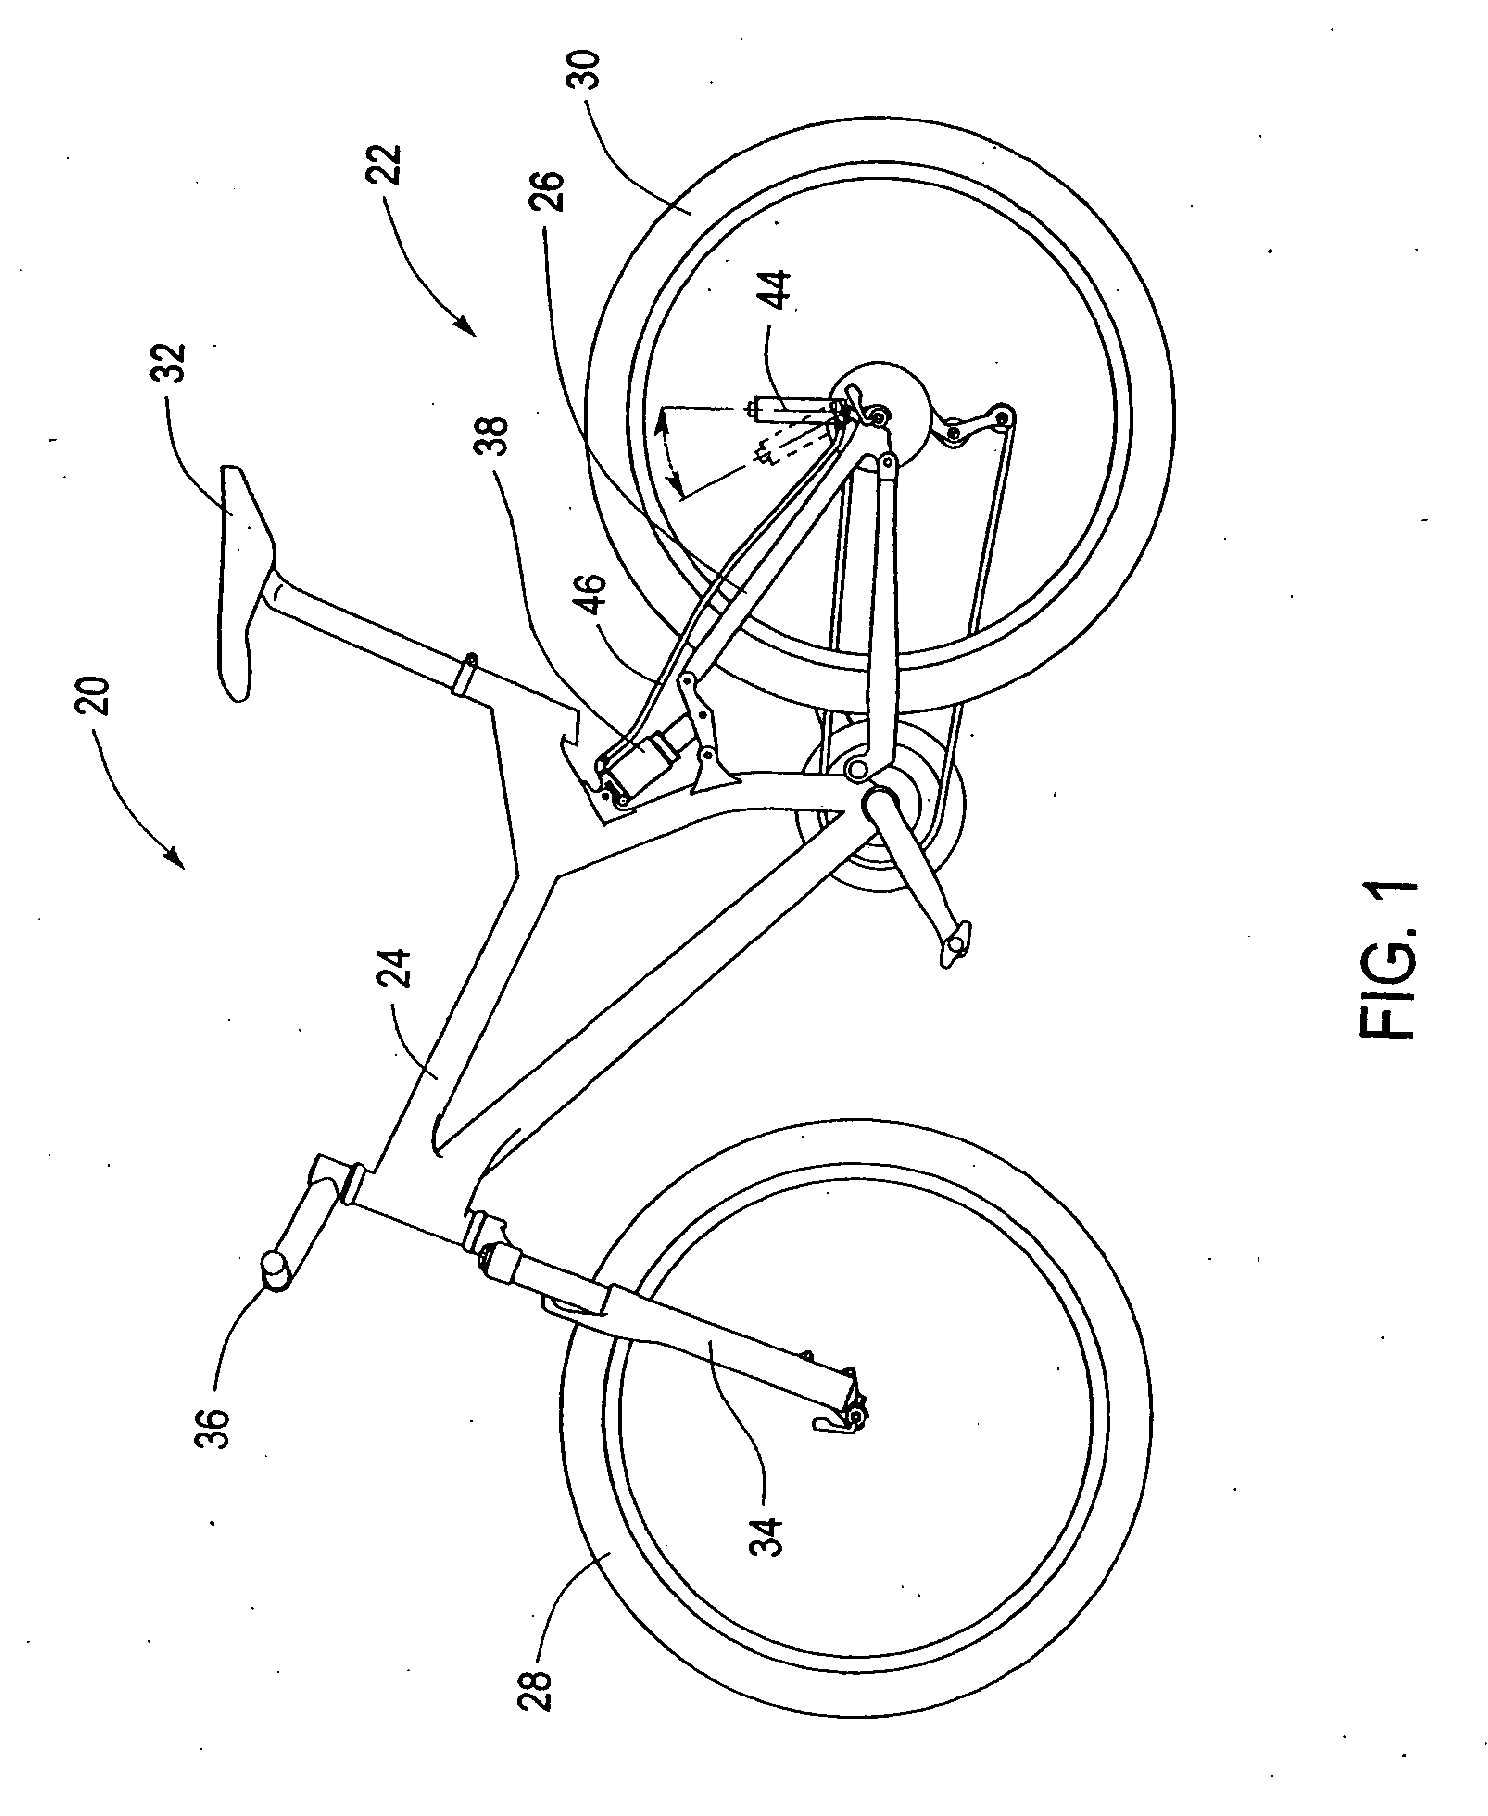 Shock Absorber With Electronic Control